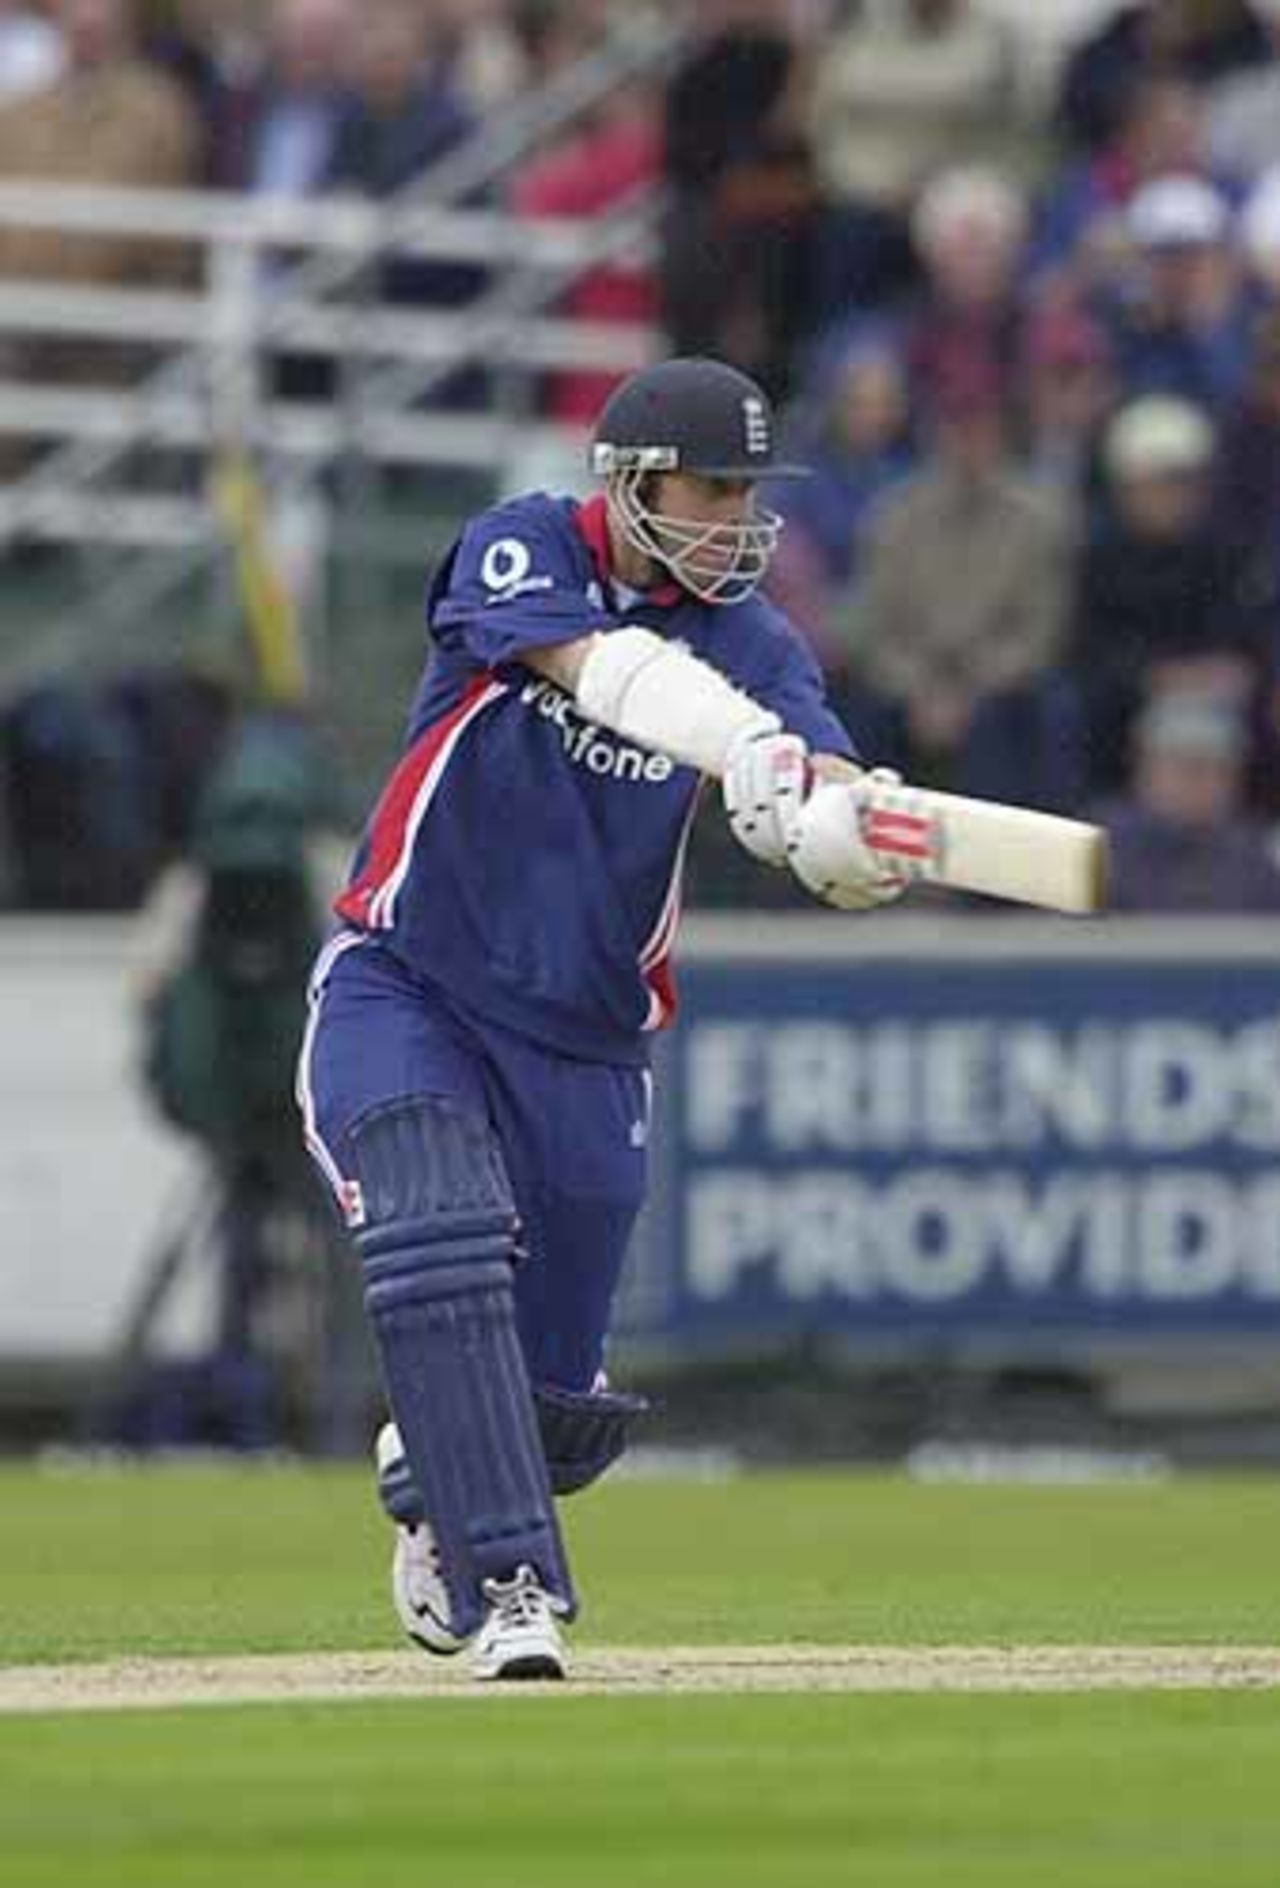 Nick Knight with a swing and a miss in the England innings, England v India at Chester-le-Street, July 2002